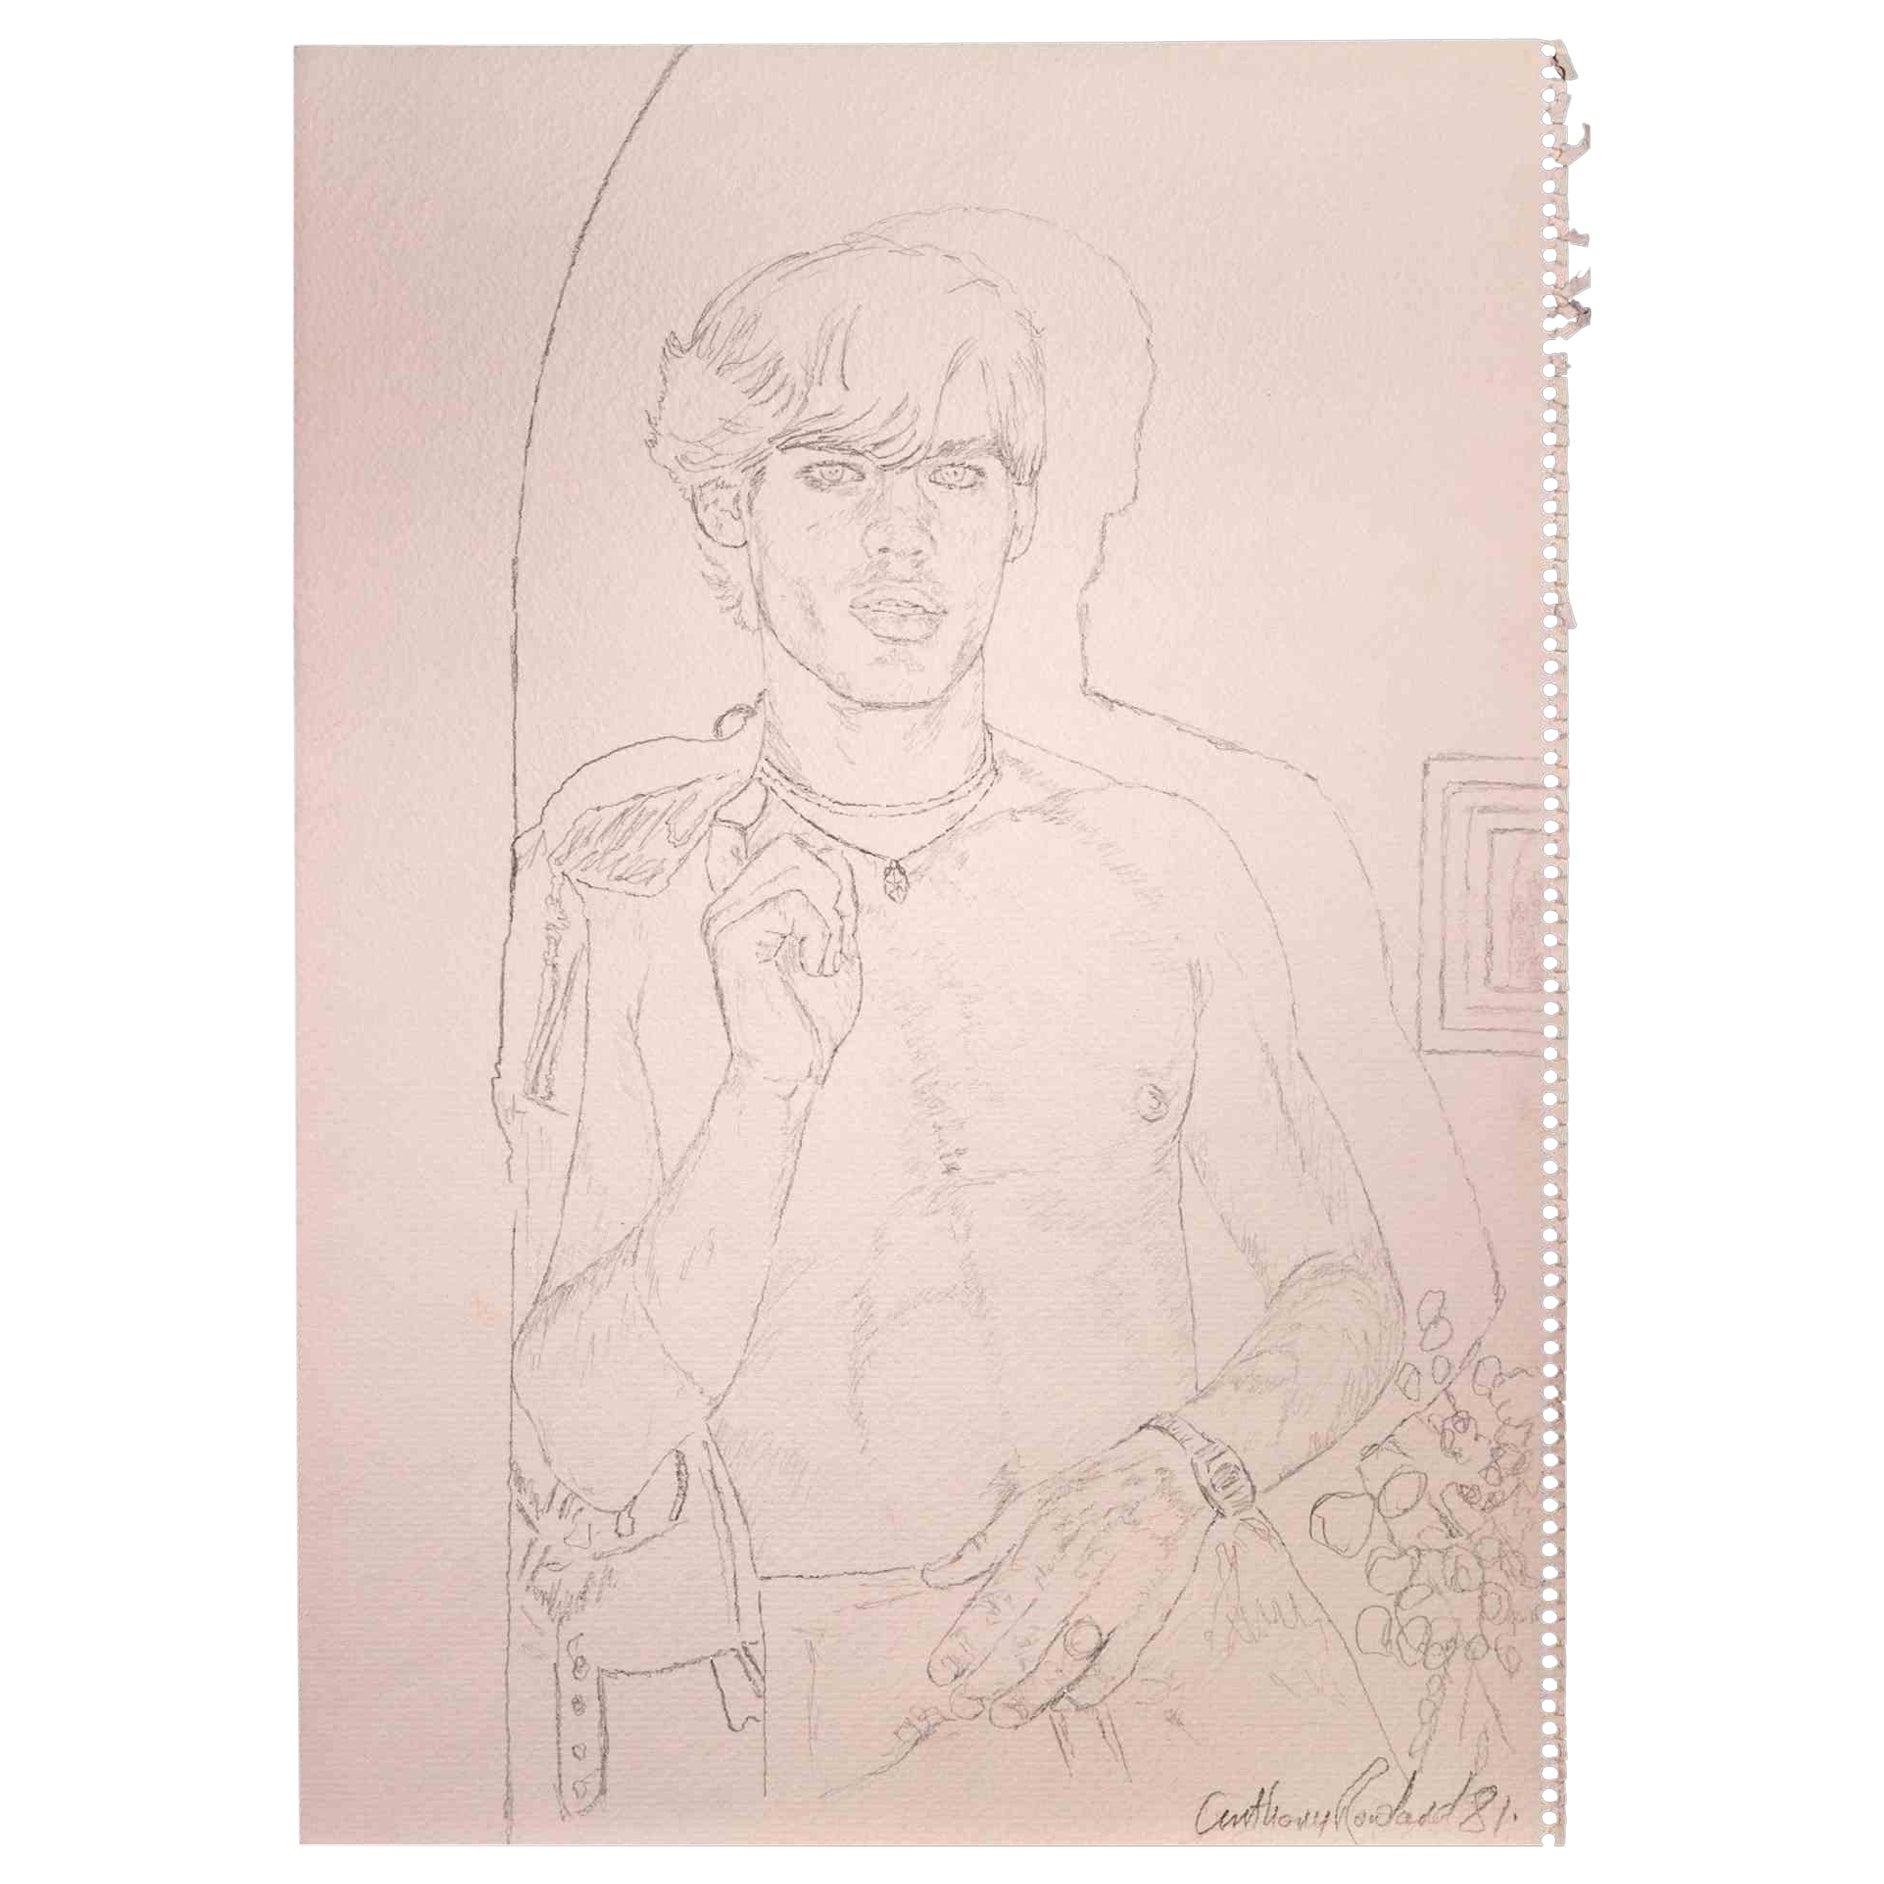 Portrait of a boy  is an original drawing on pencil realized by Anthony Roaland in 1981. Hand-signed and dated by the artist on the lower right margin. 

The artist represents the figure with subjectivity and spontaneity.

Good conditions.